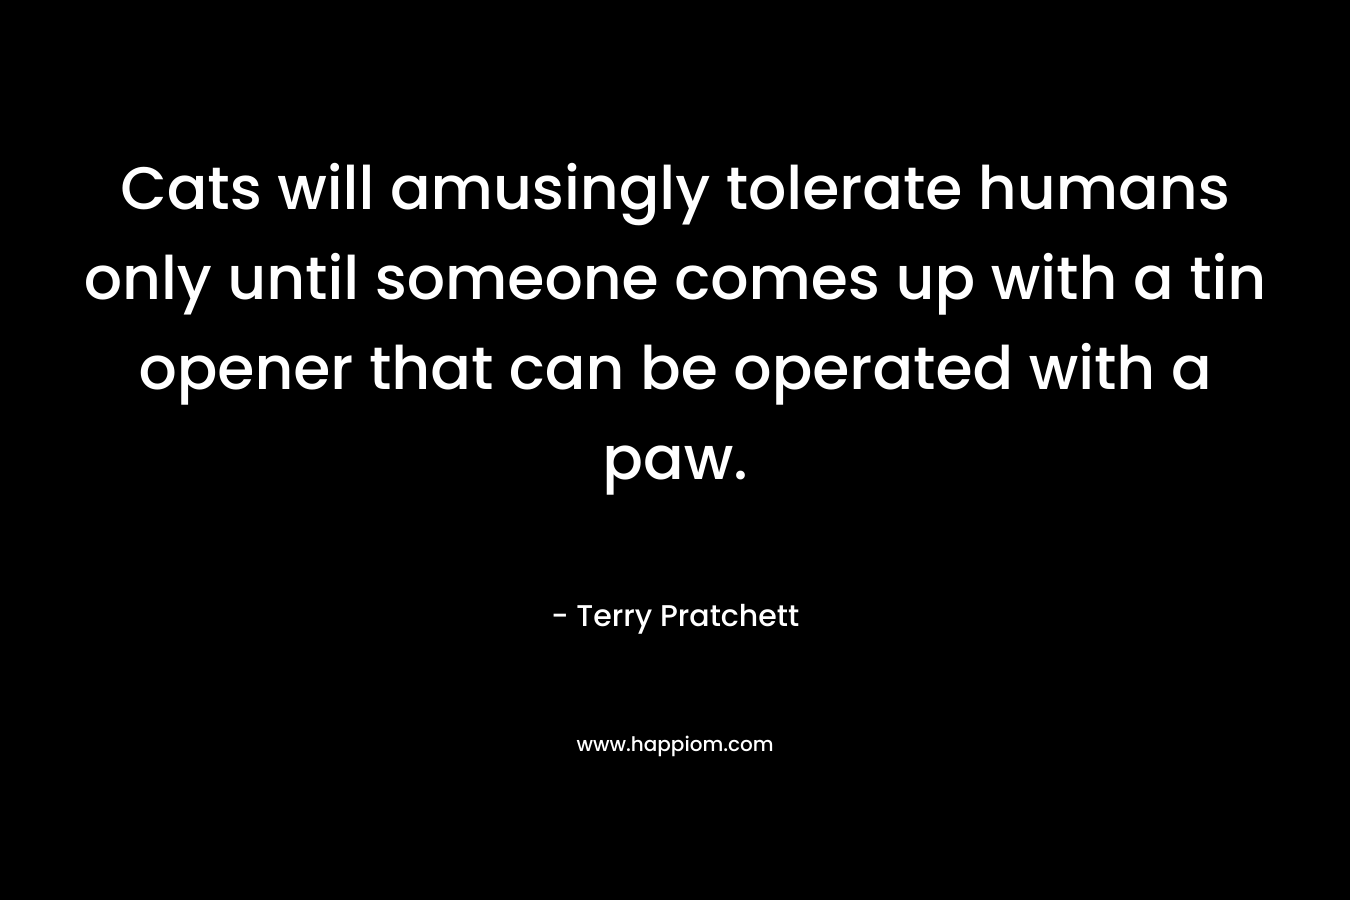 Cats will amusingly tolerate humans only until someone comes up with a tin opener that can be operated with a paw. – Terry Pratchett